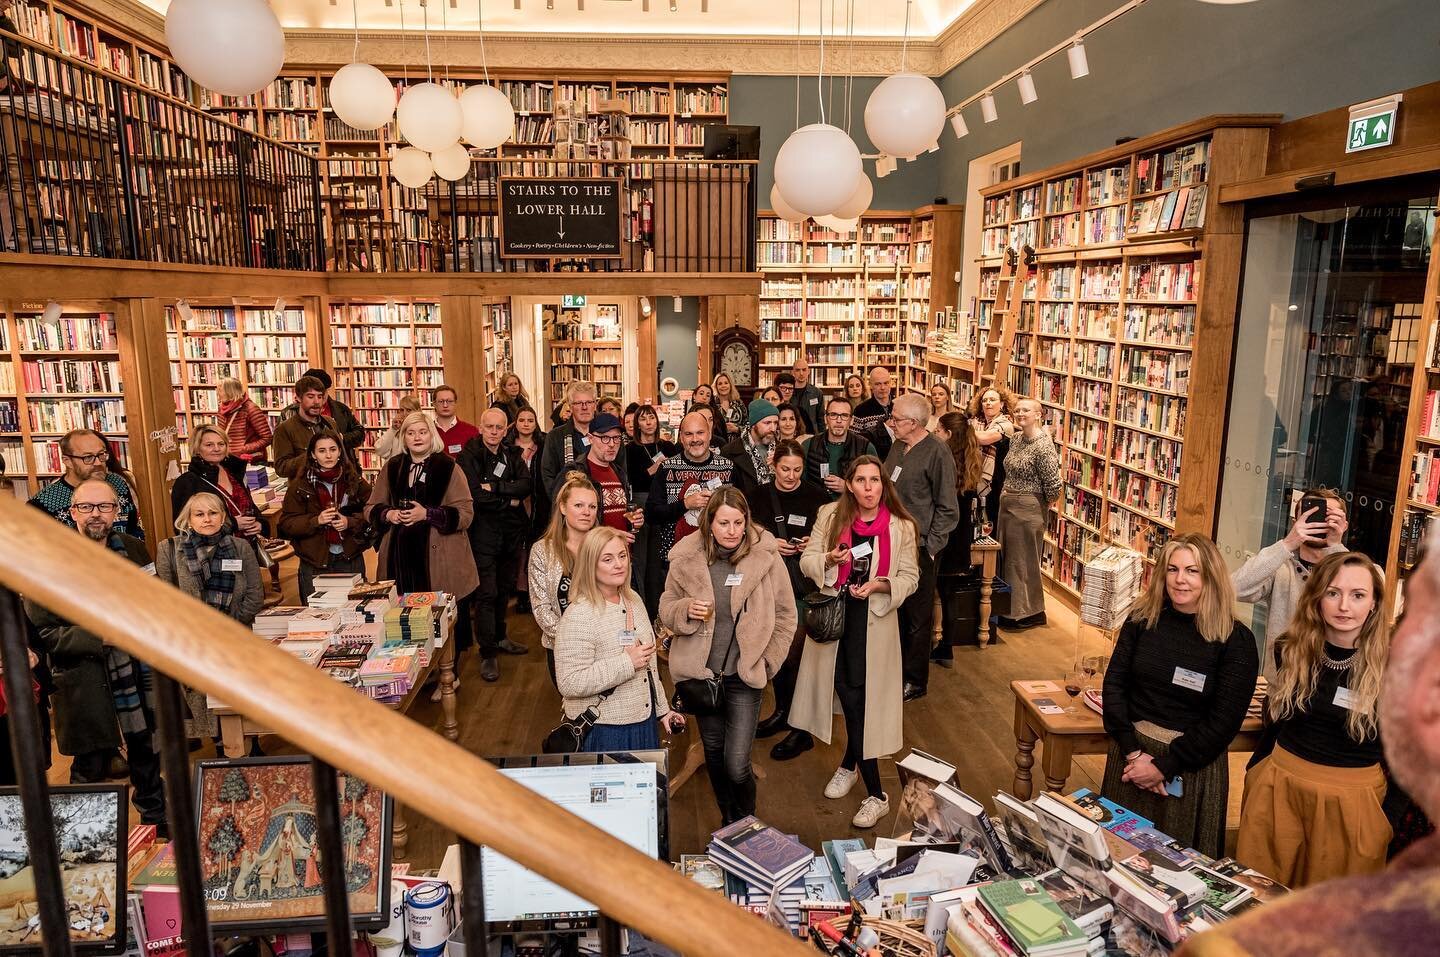 ❄️📚@creativebath recently held its annual Winter Get Together at @toppingsbath for a fab reception! 

Mulled Wine, books, great company - what more could you want for a creative, festive evening! 

Thank you to all that attended and we hope you have